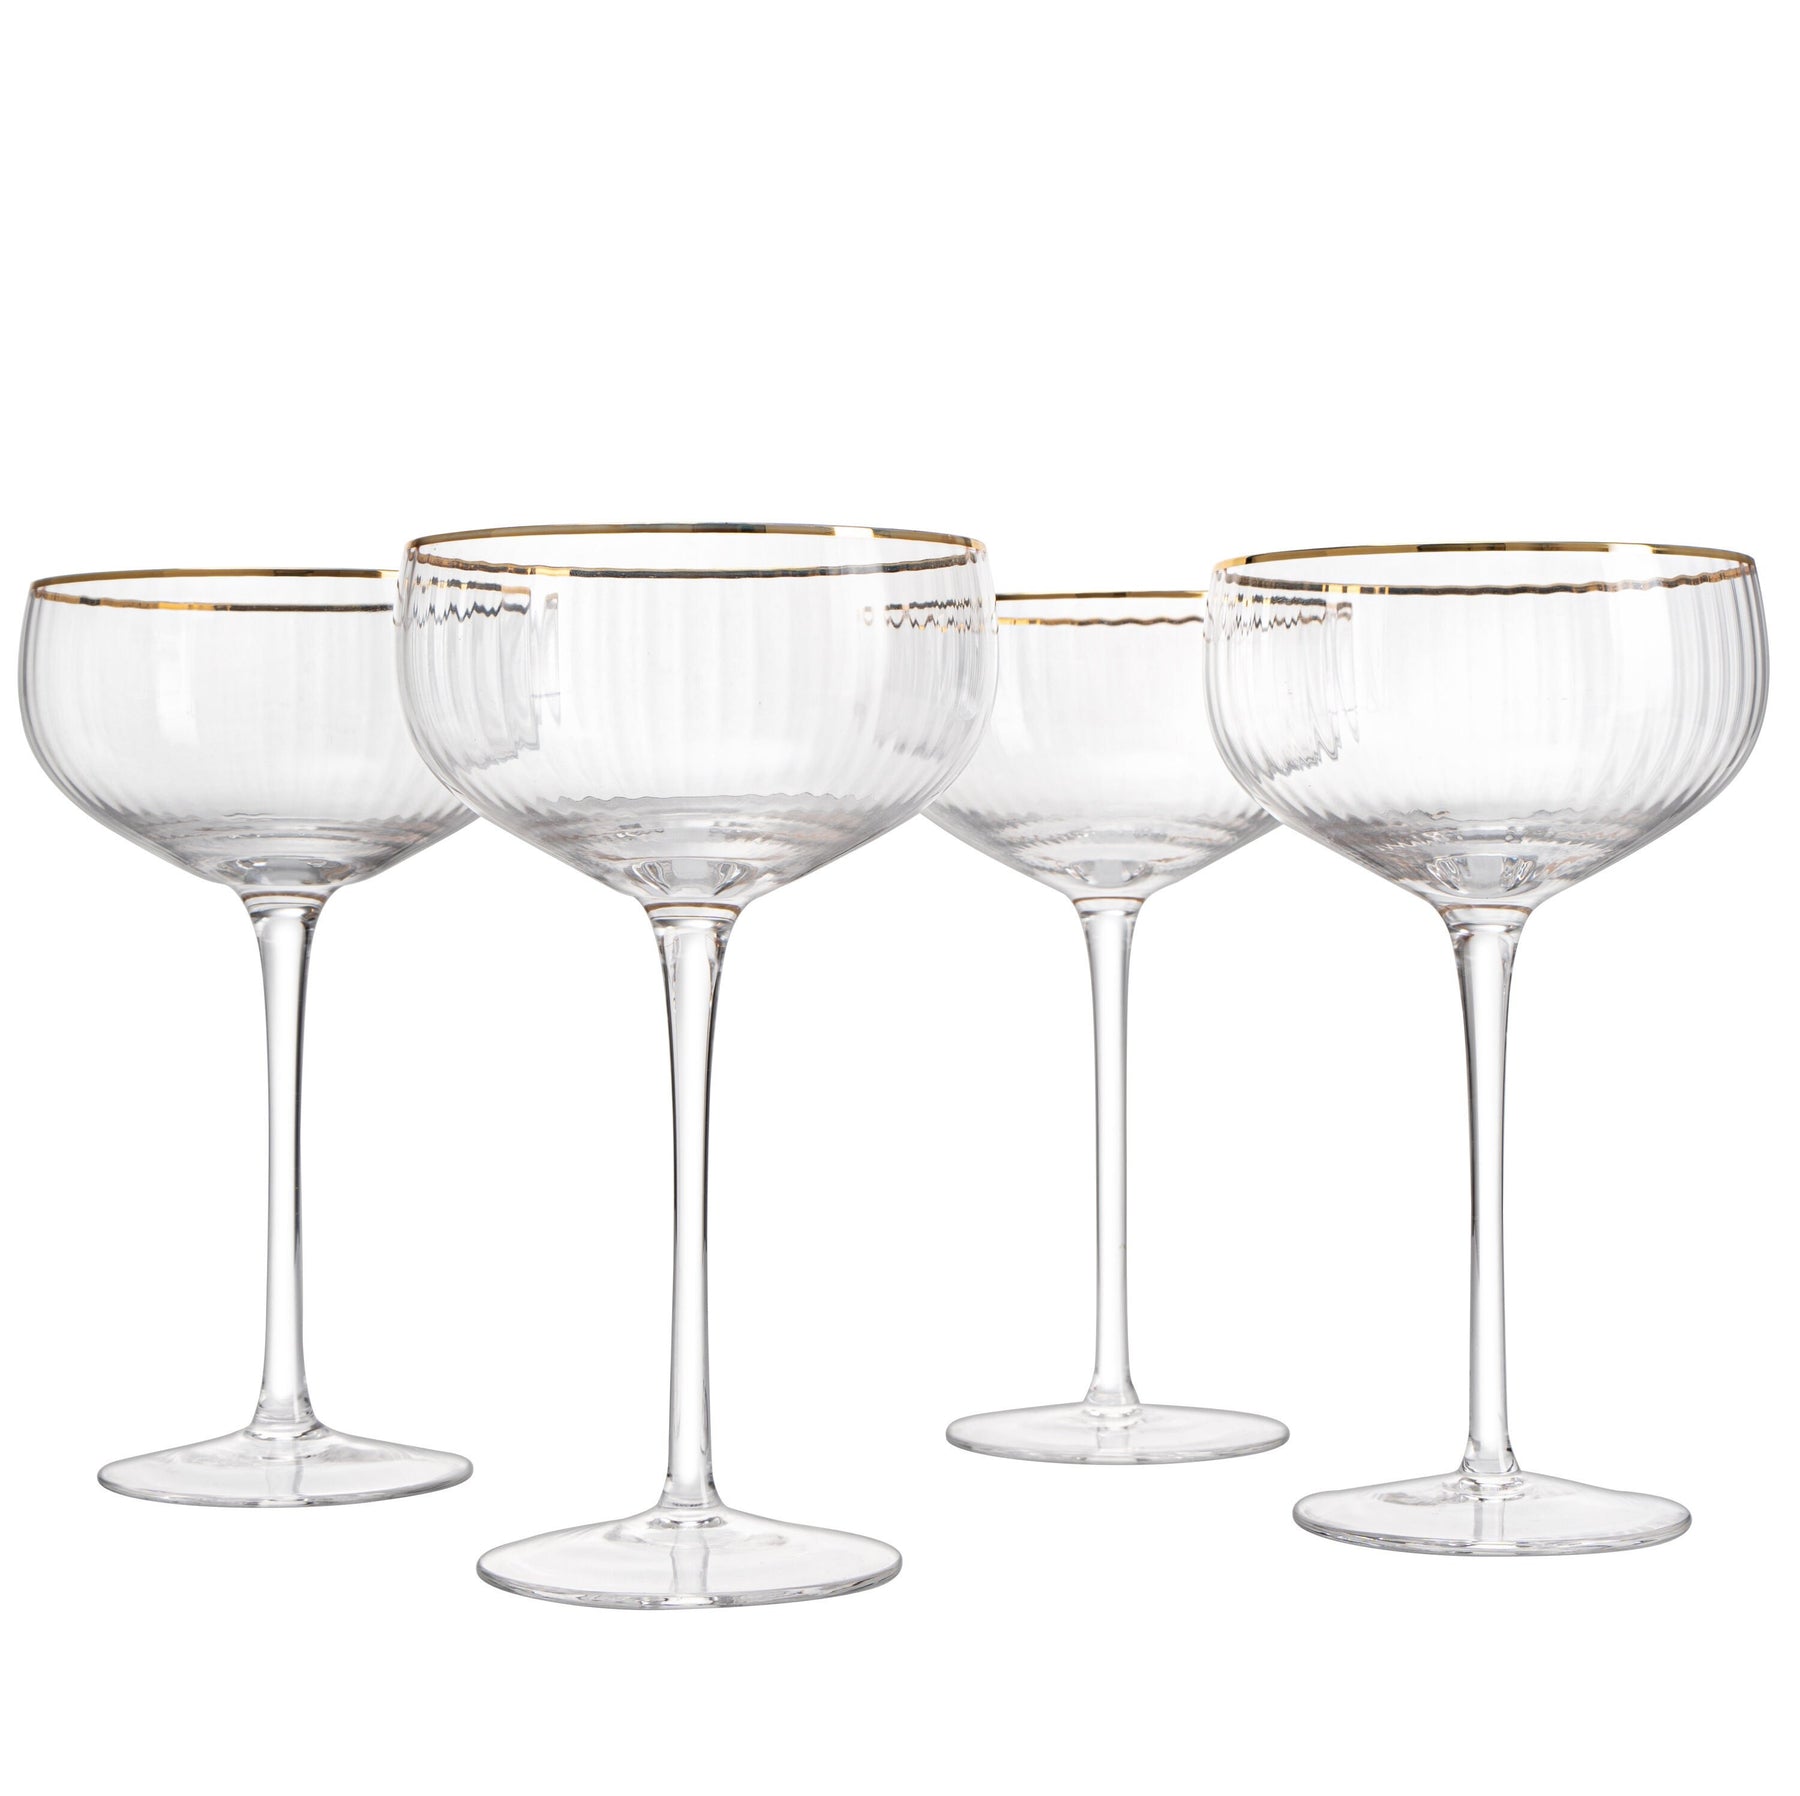 Union Street Manhattan Gold Champagne Glasses Sold Separately 